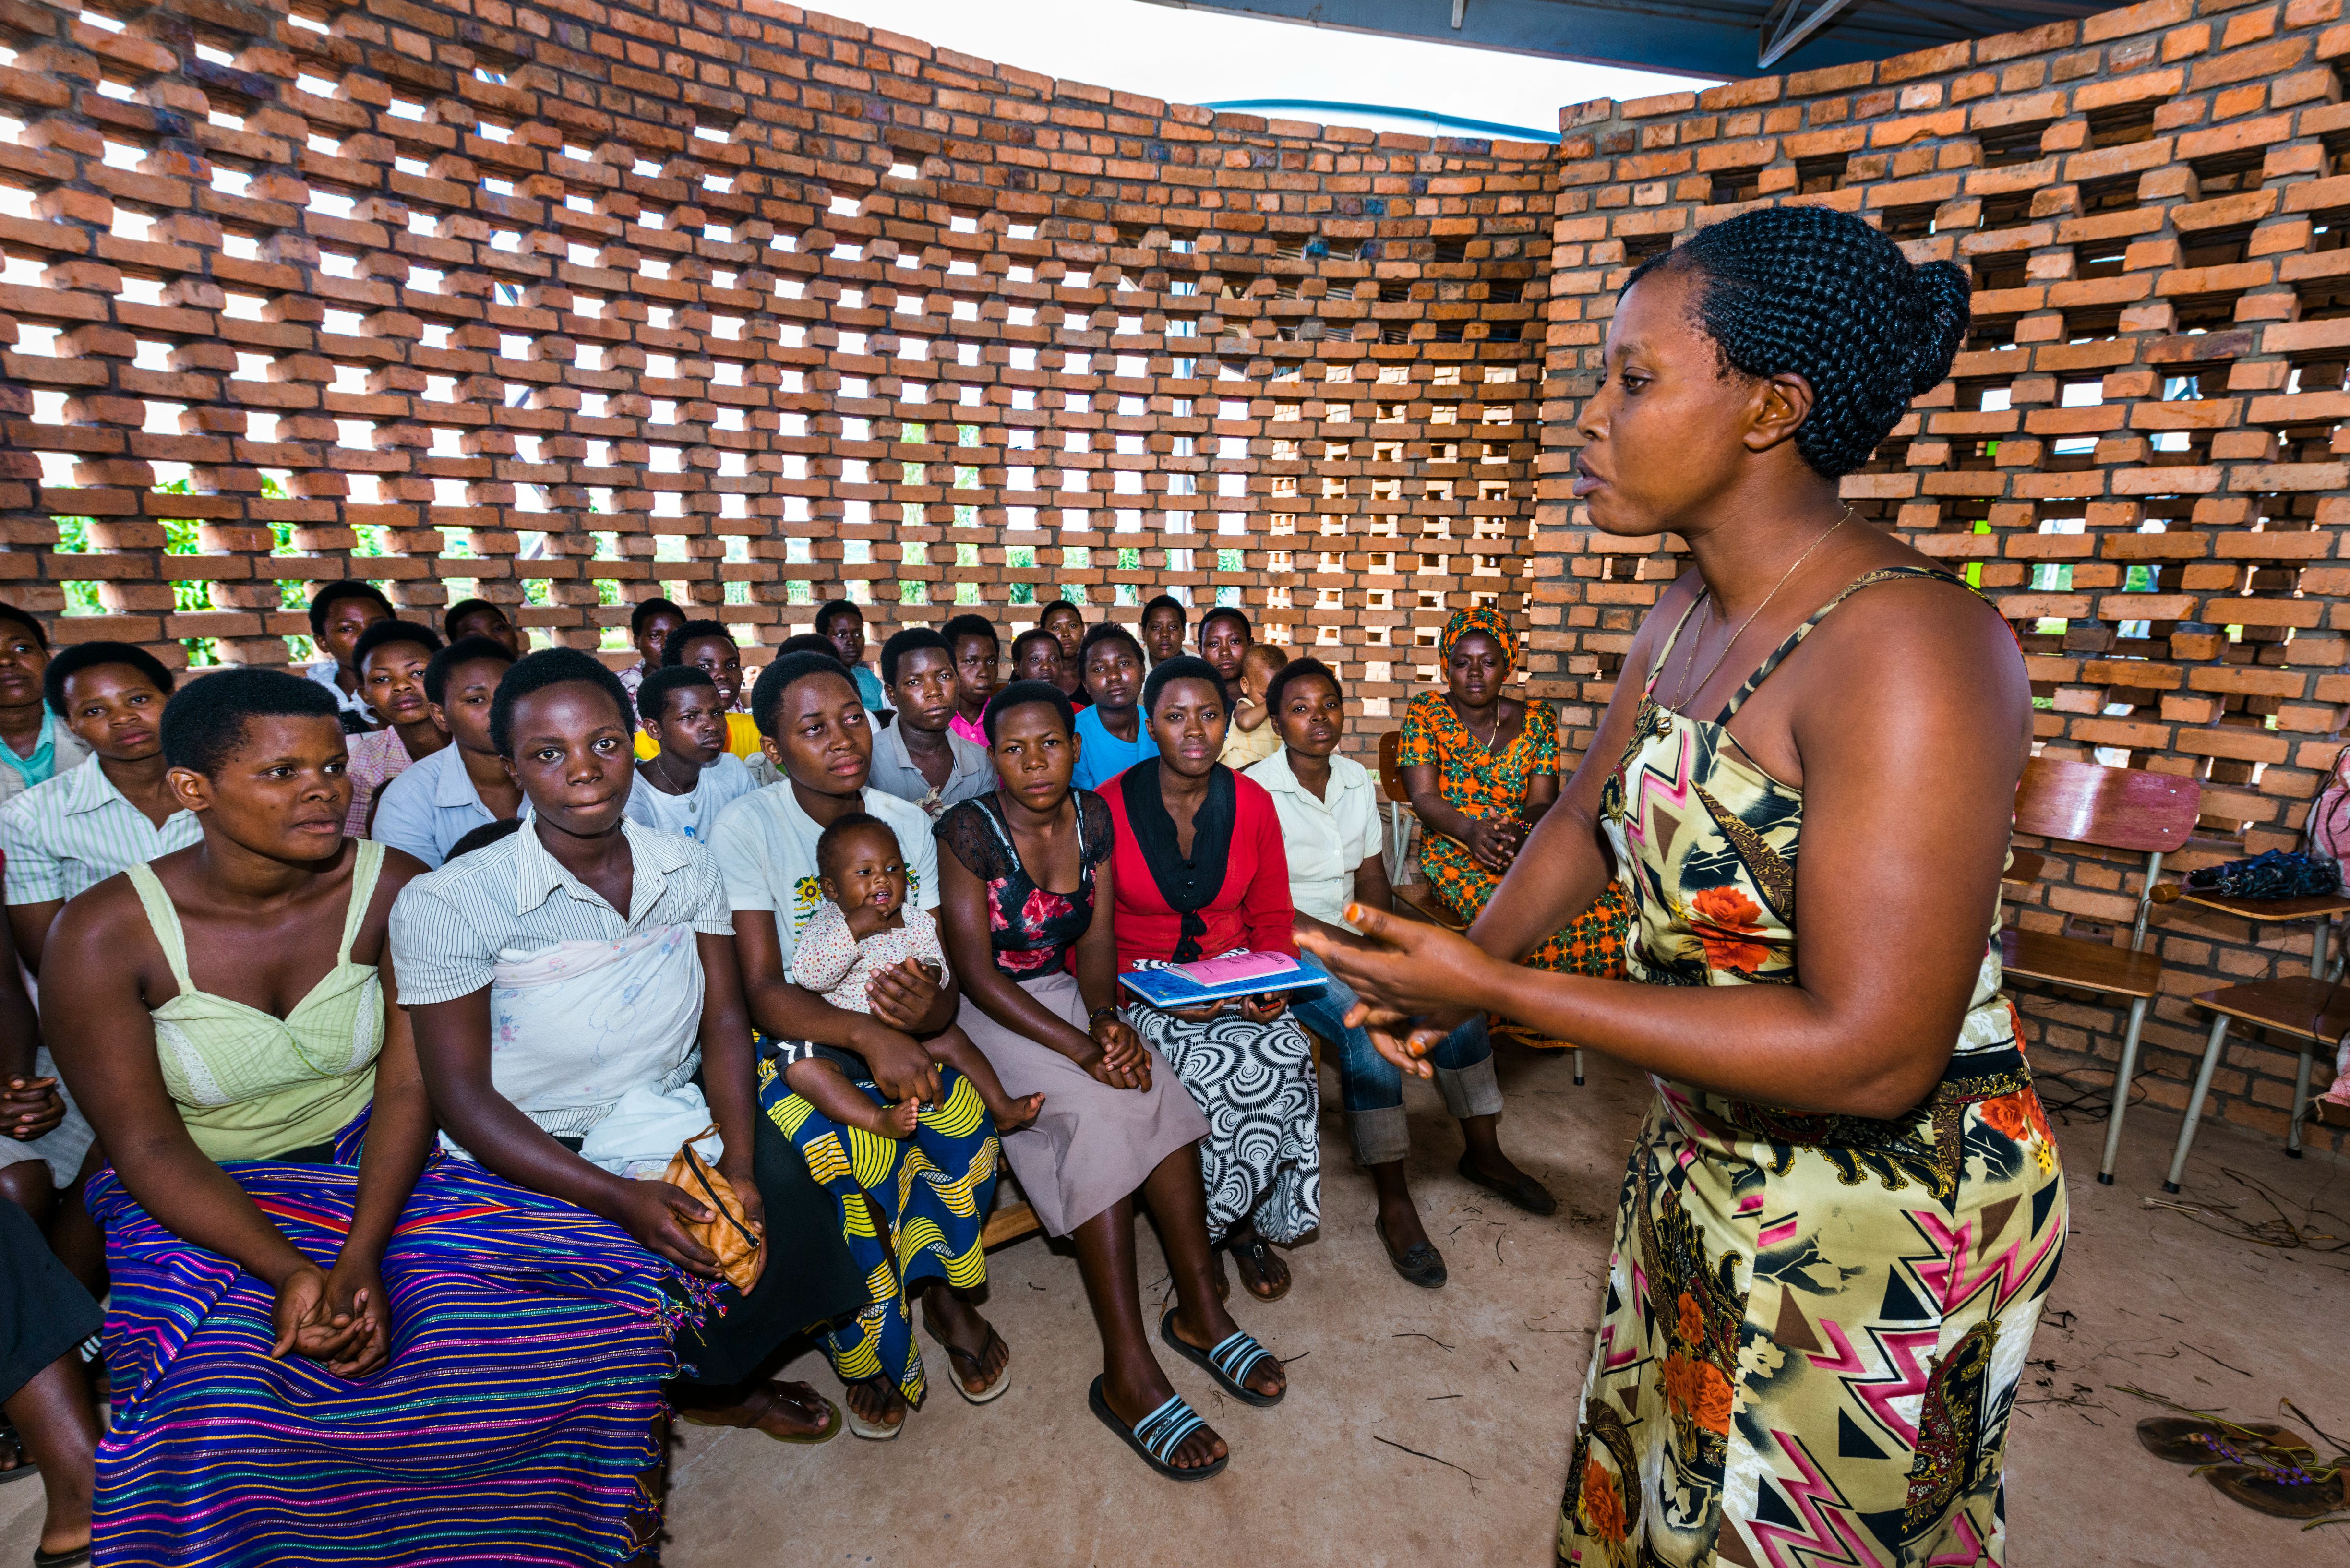 Women come together for class at the Women's Opportunity Center in Kayonza, Rwanda